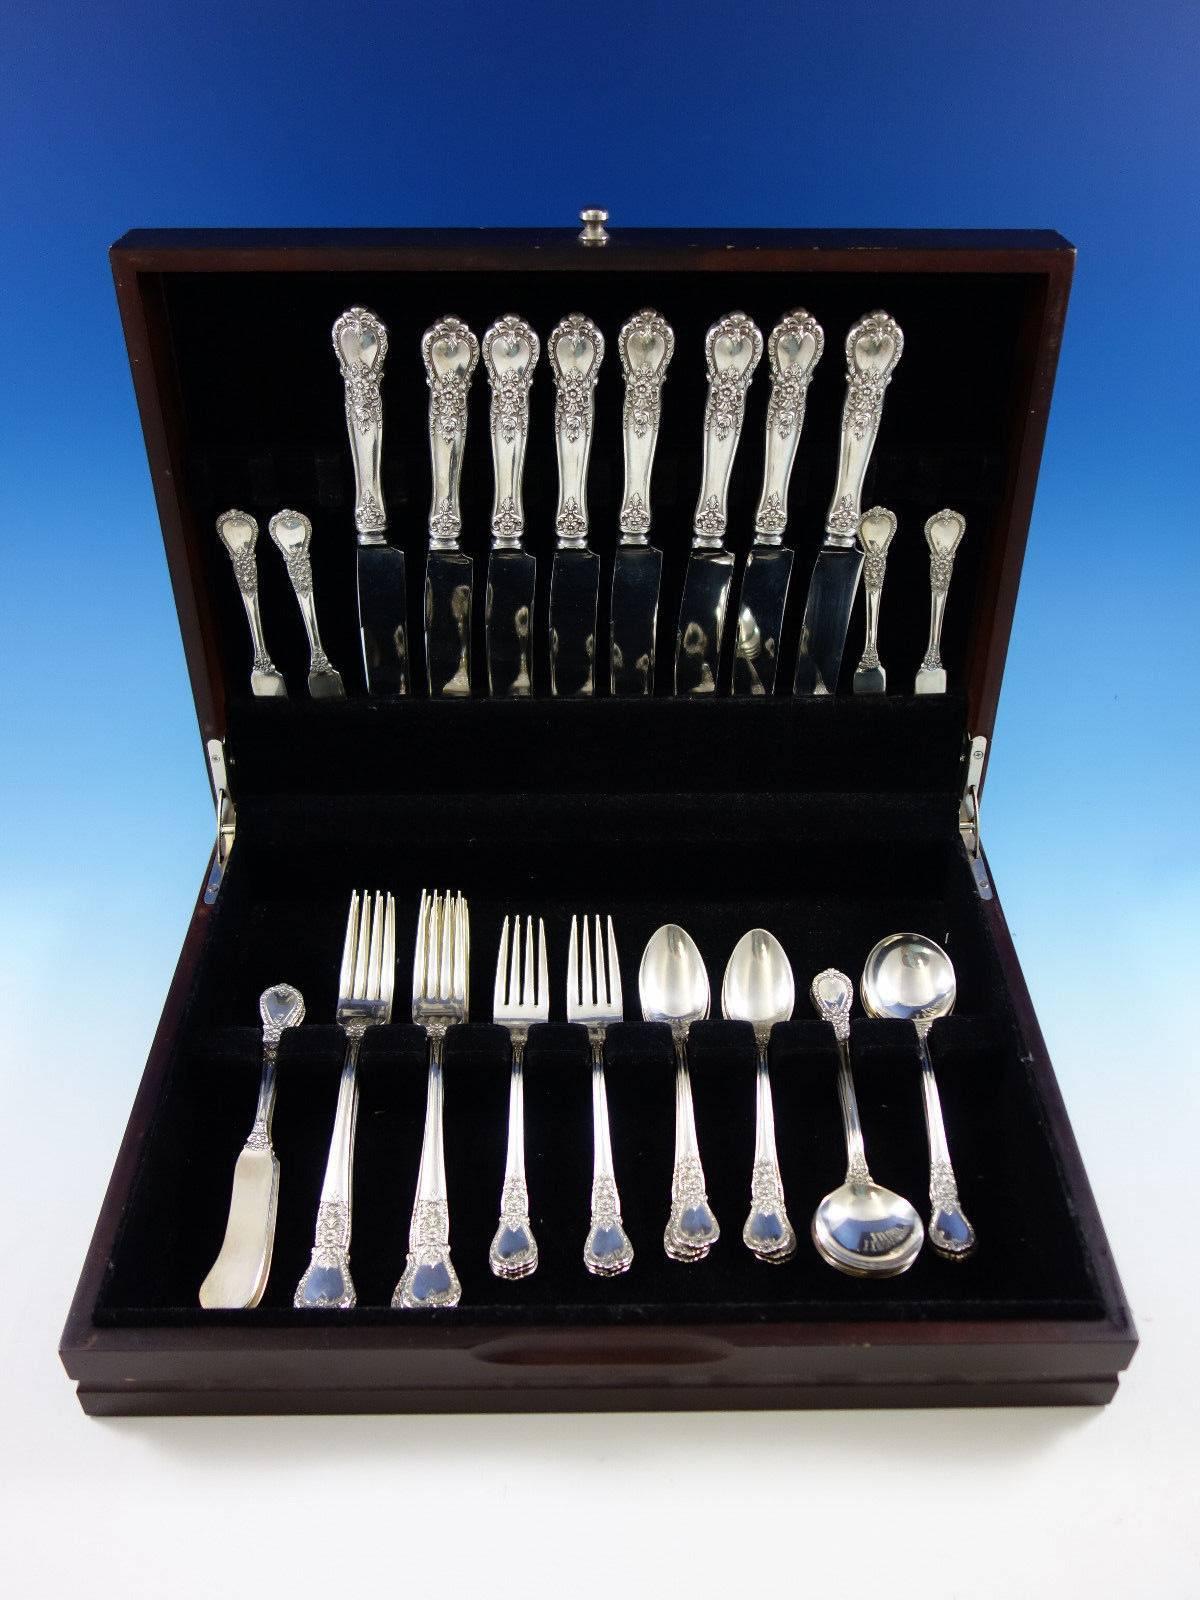 This set includes:

Eight dinner size knives, 9 1/2